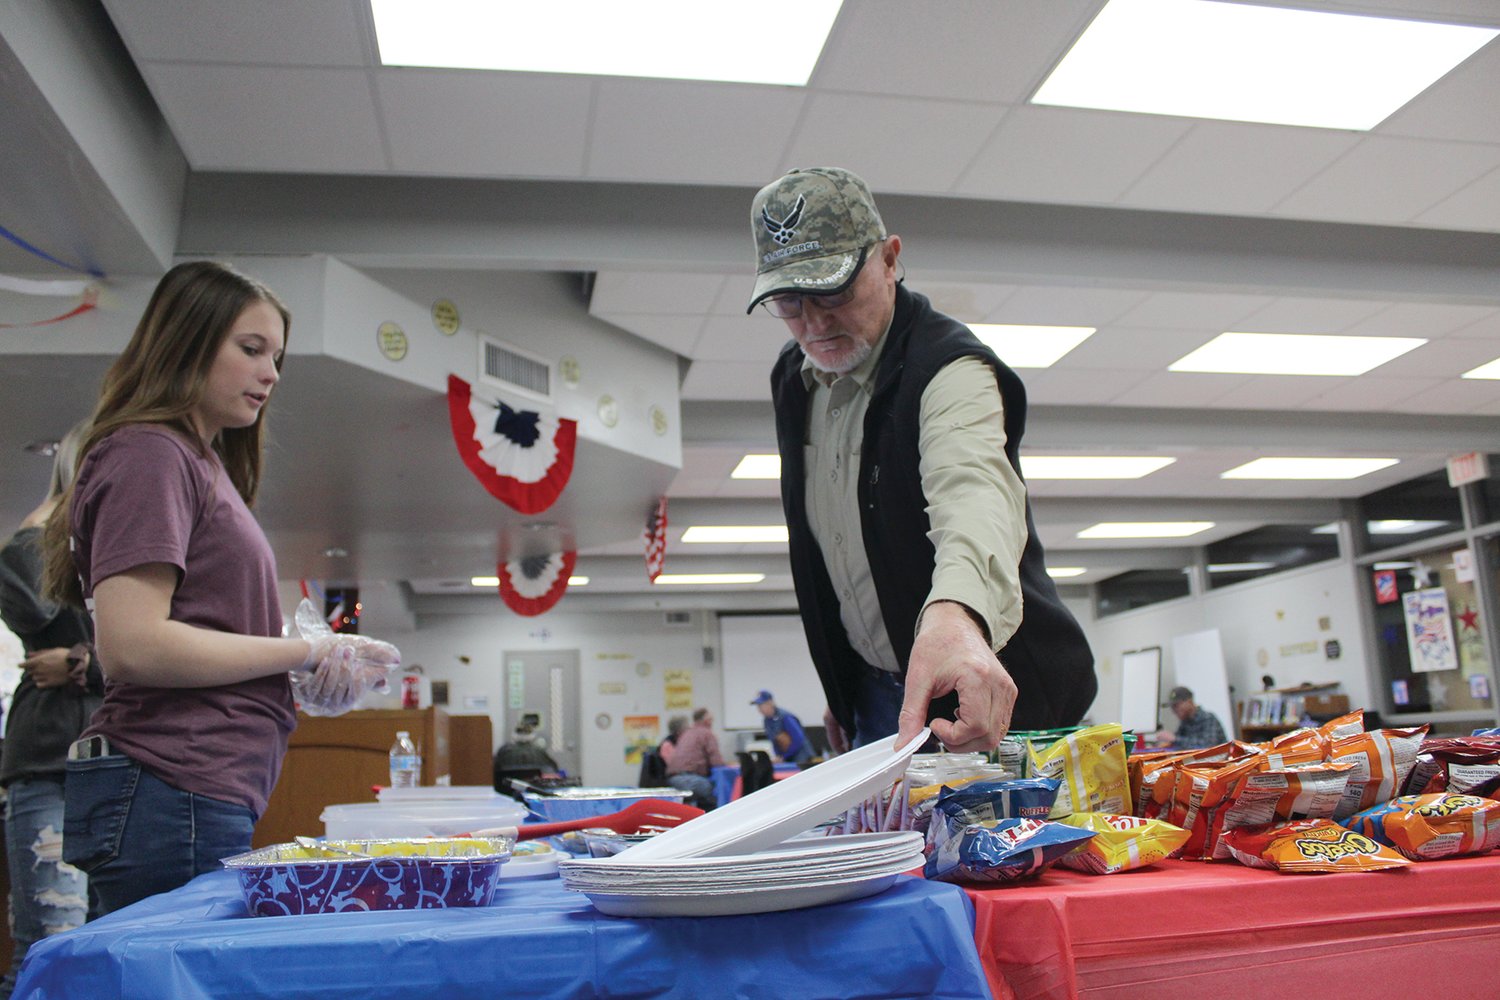 The StuCo’s Veterans Day lunch was held at Mansfield High School.